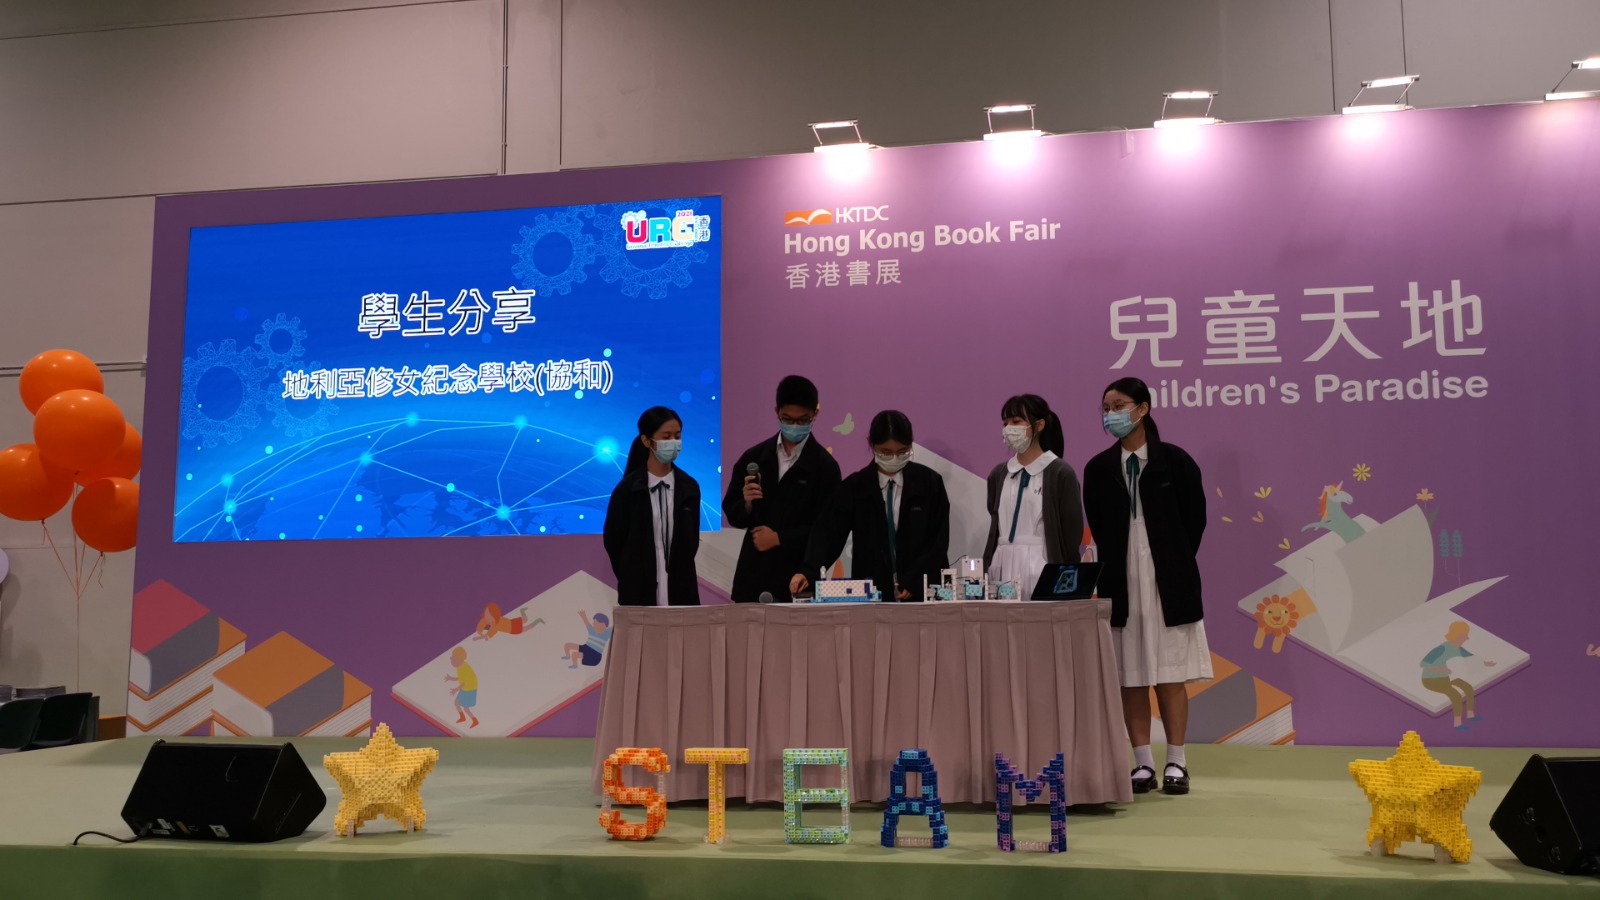 URC Little Inventors - Epidemic Prevention Robot Sharing Session at the Hong Kong Book Fair 2021